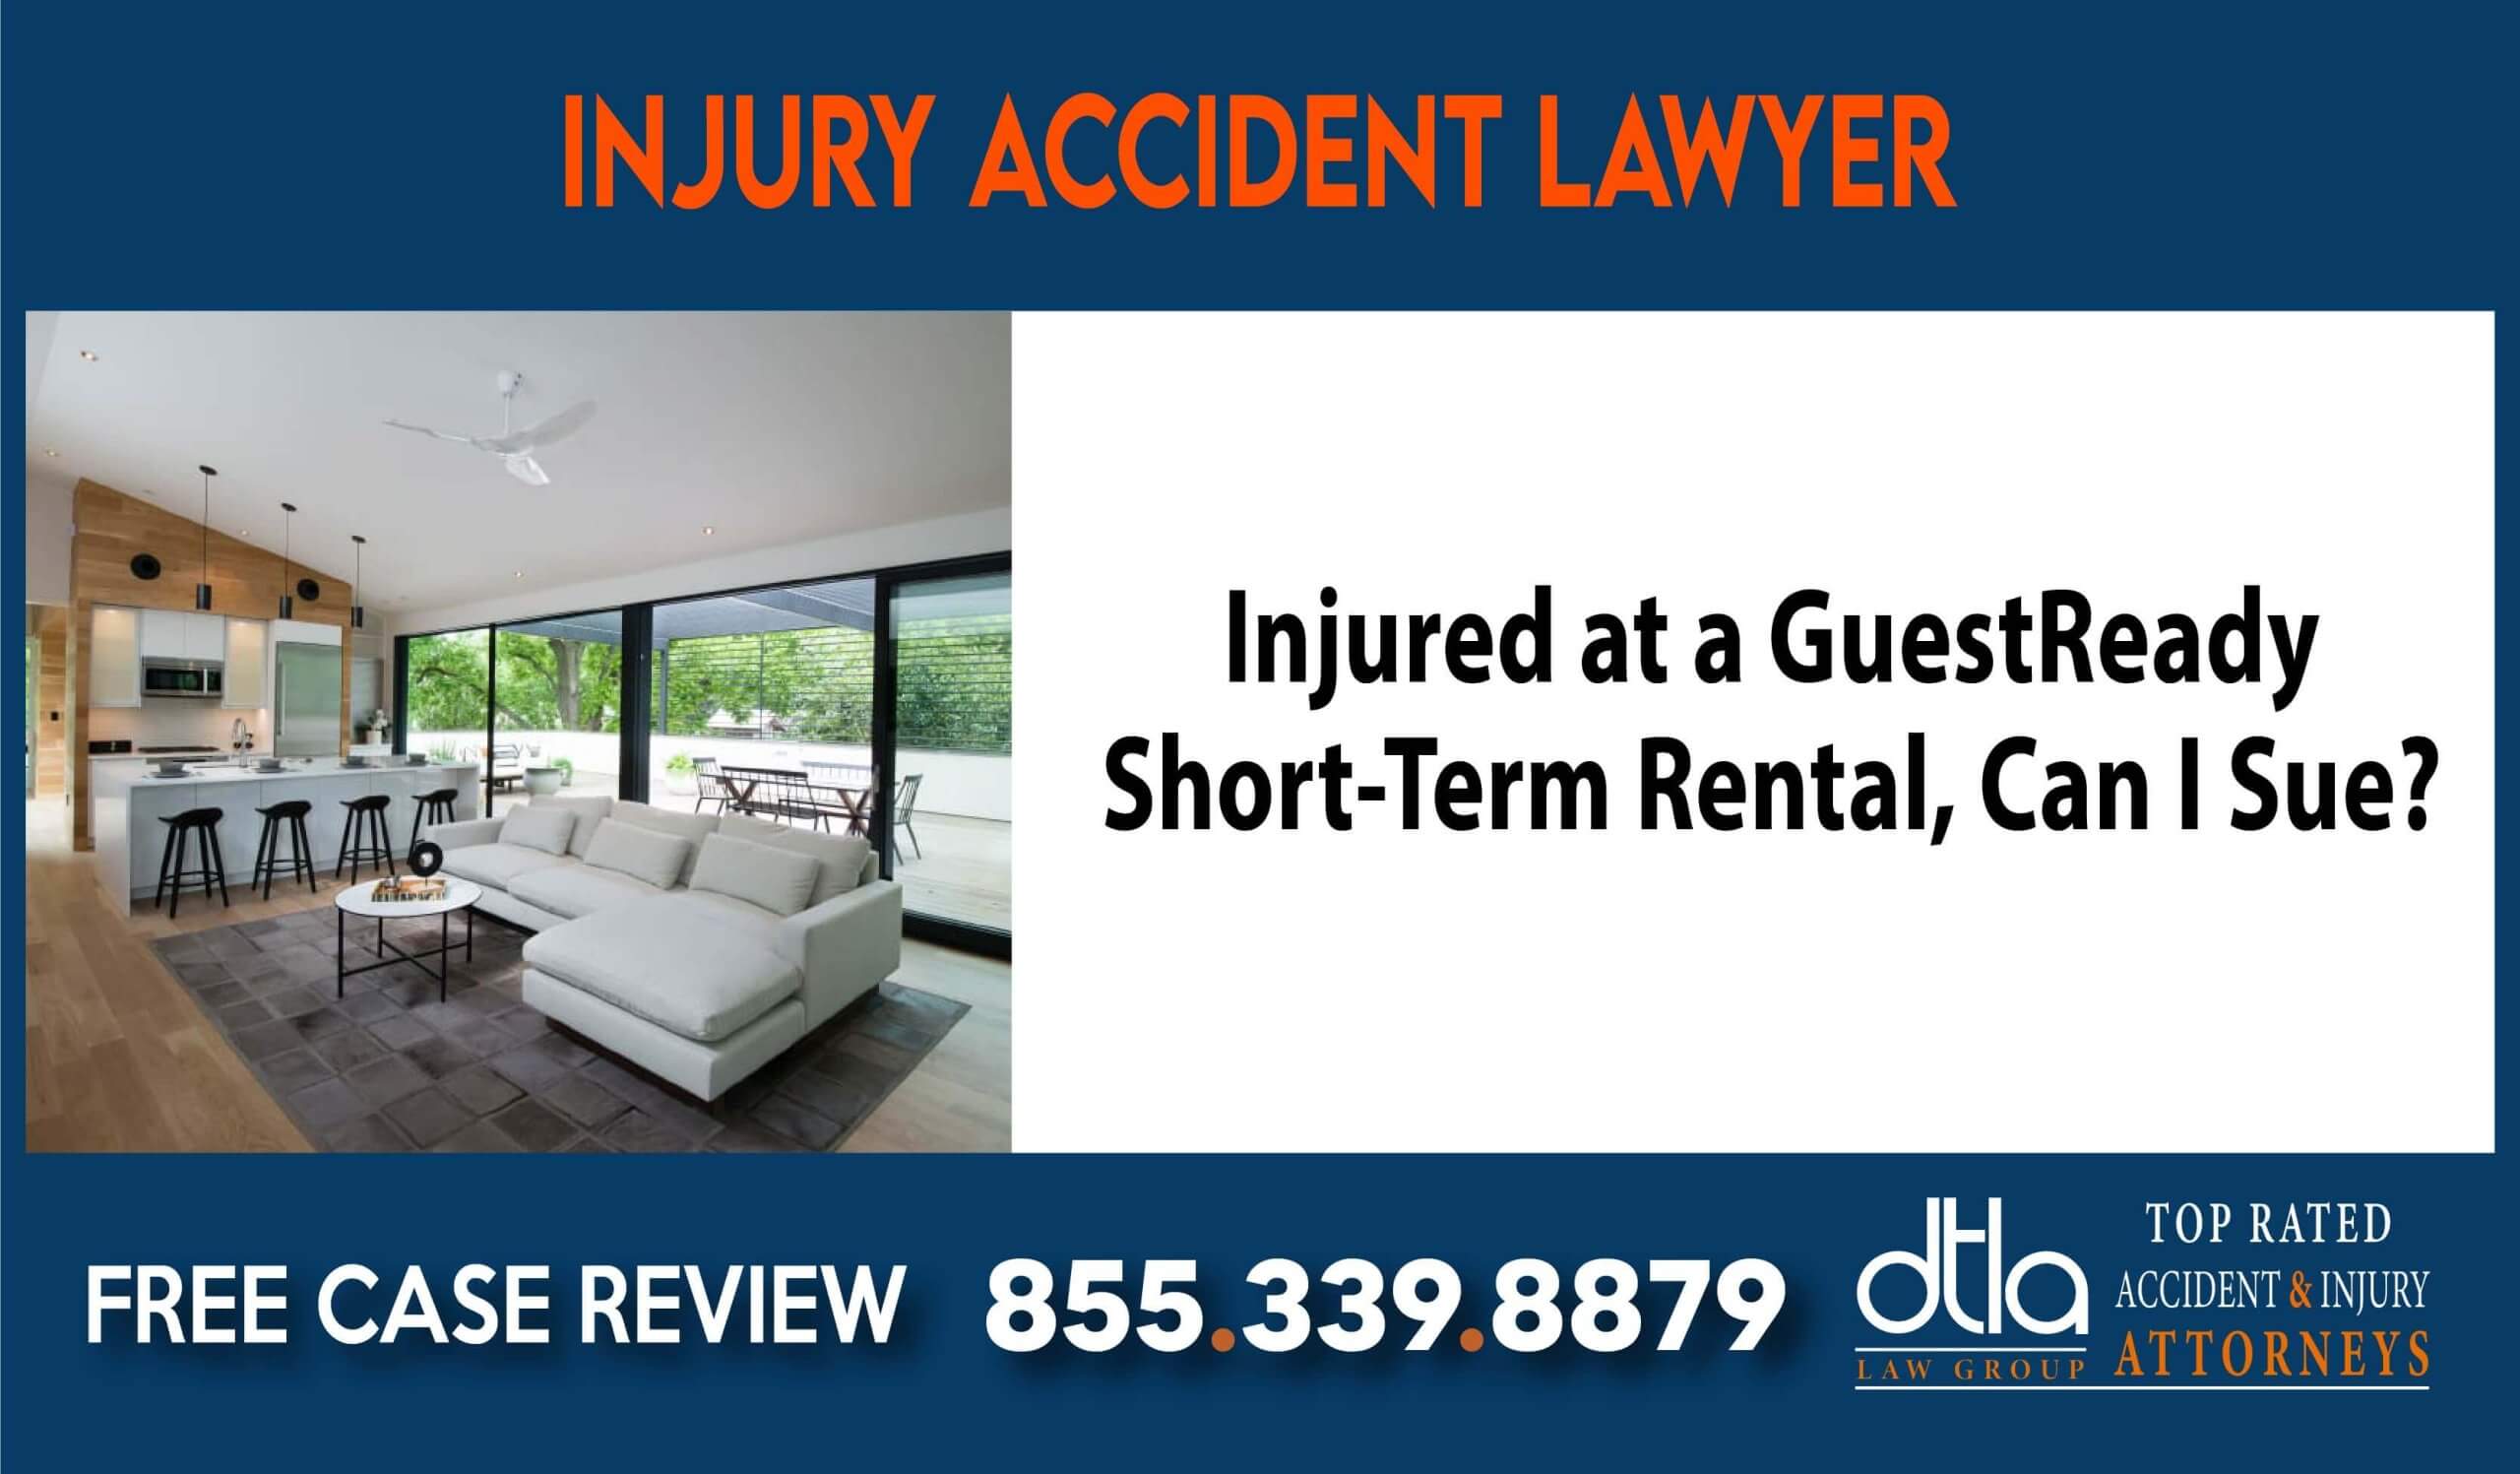 Injured at a GuestReady Short-Term Rental Can I Sue lawyer attorney compensation incident liability